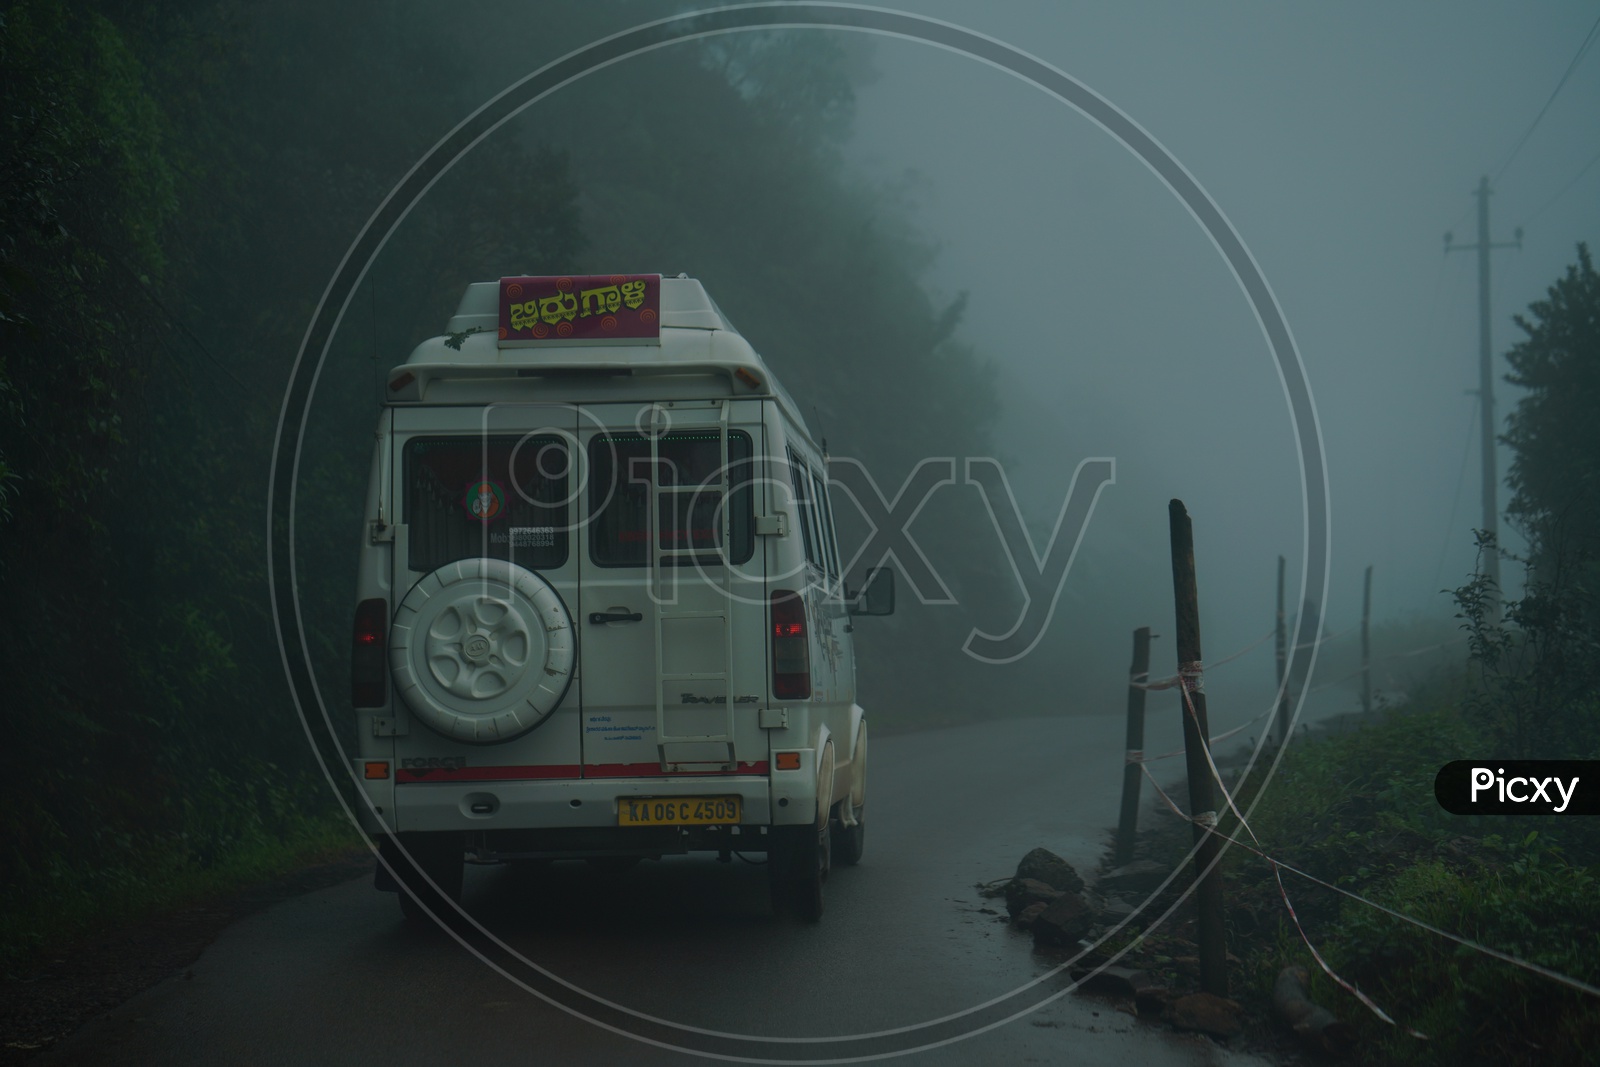 Foggy mornings Chickmangalur  / Transport Vehicles Commuting on Roads